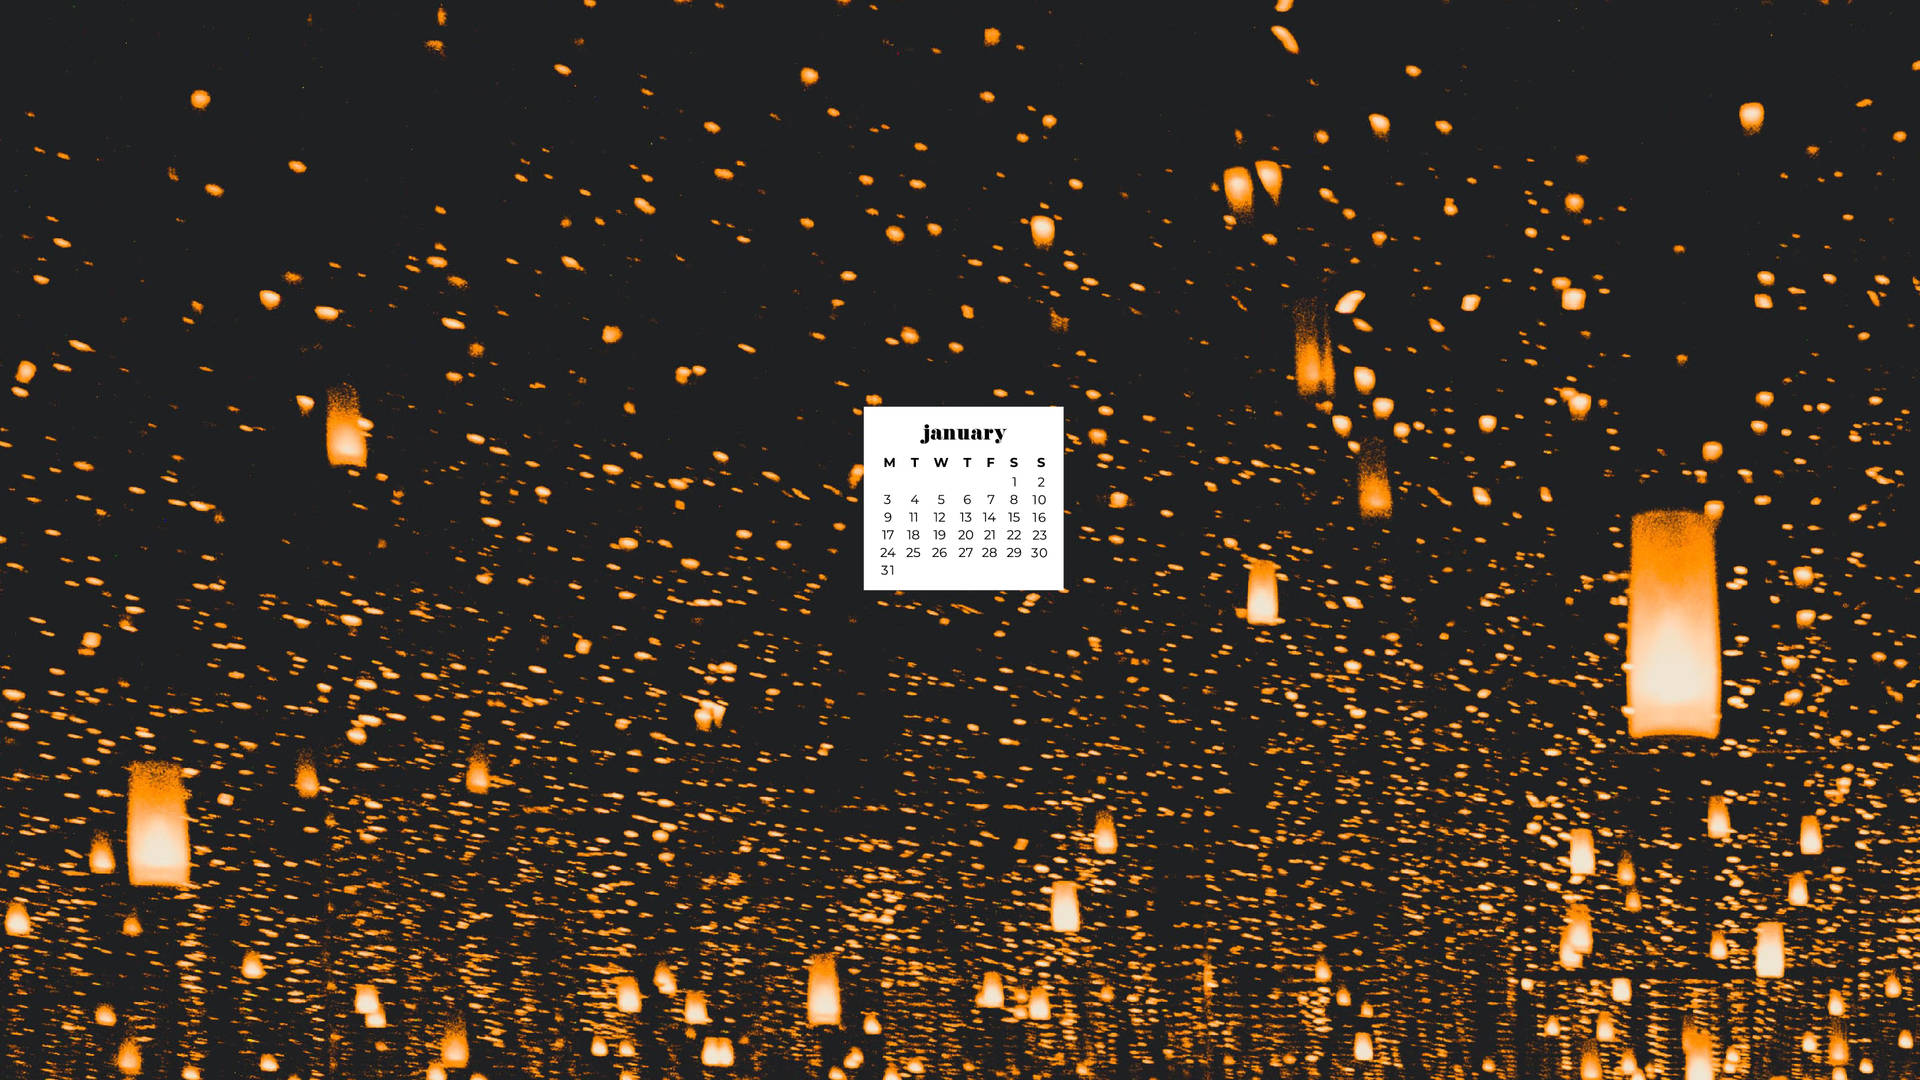 Embrace the New Year with the January 2022 calendar, decorated with beautiful lanterns. Wallpaper